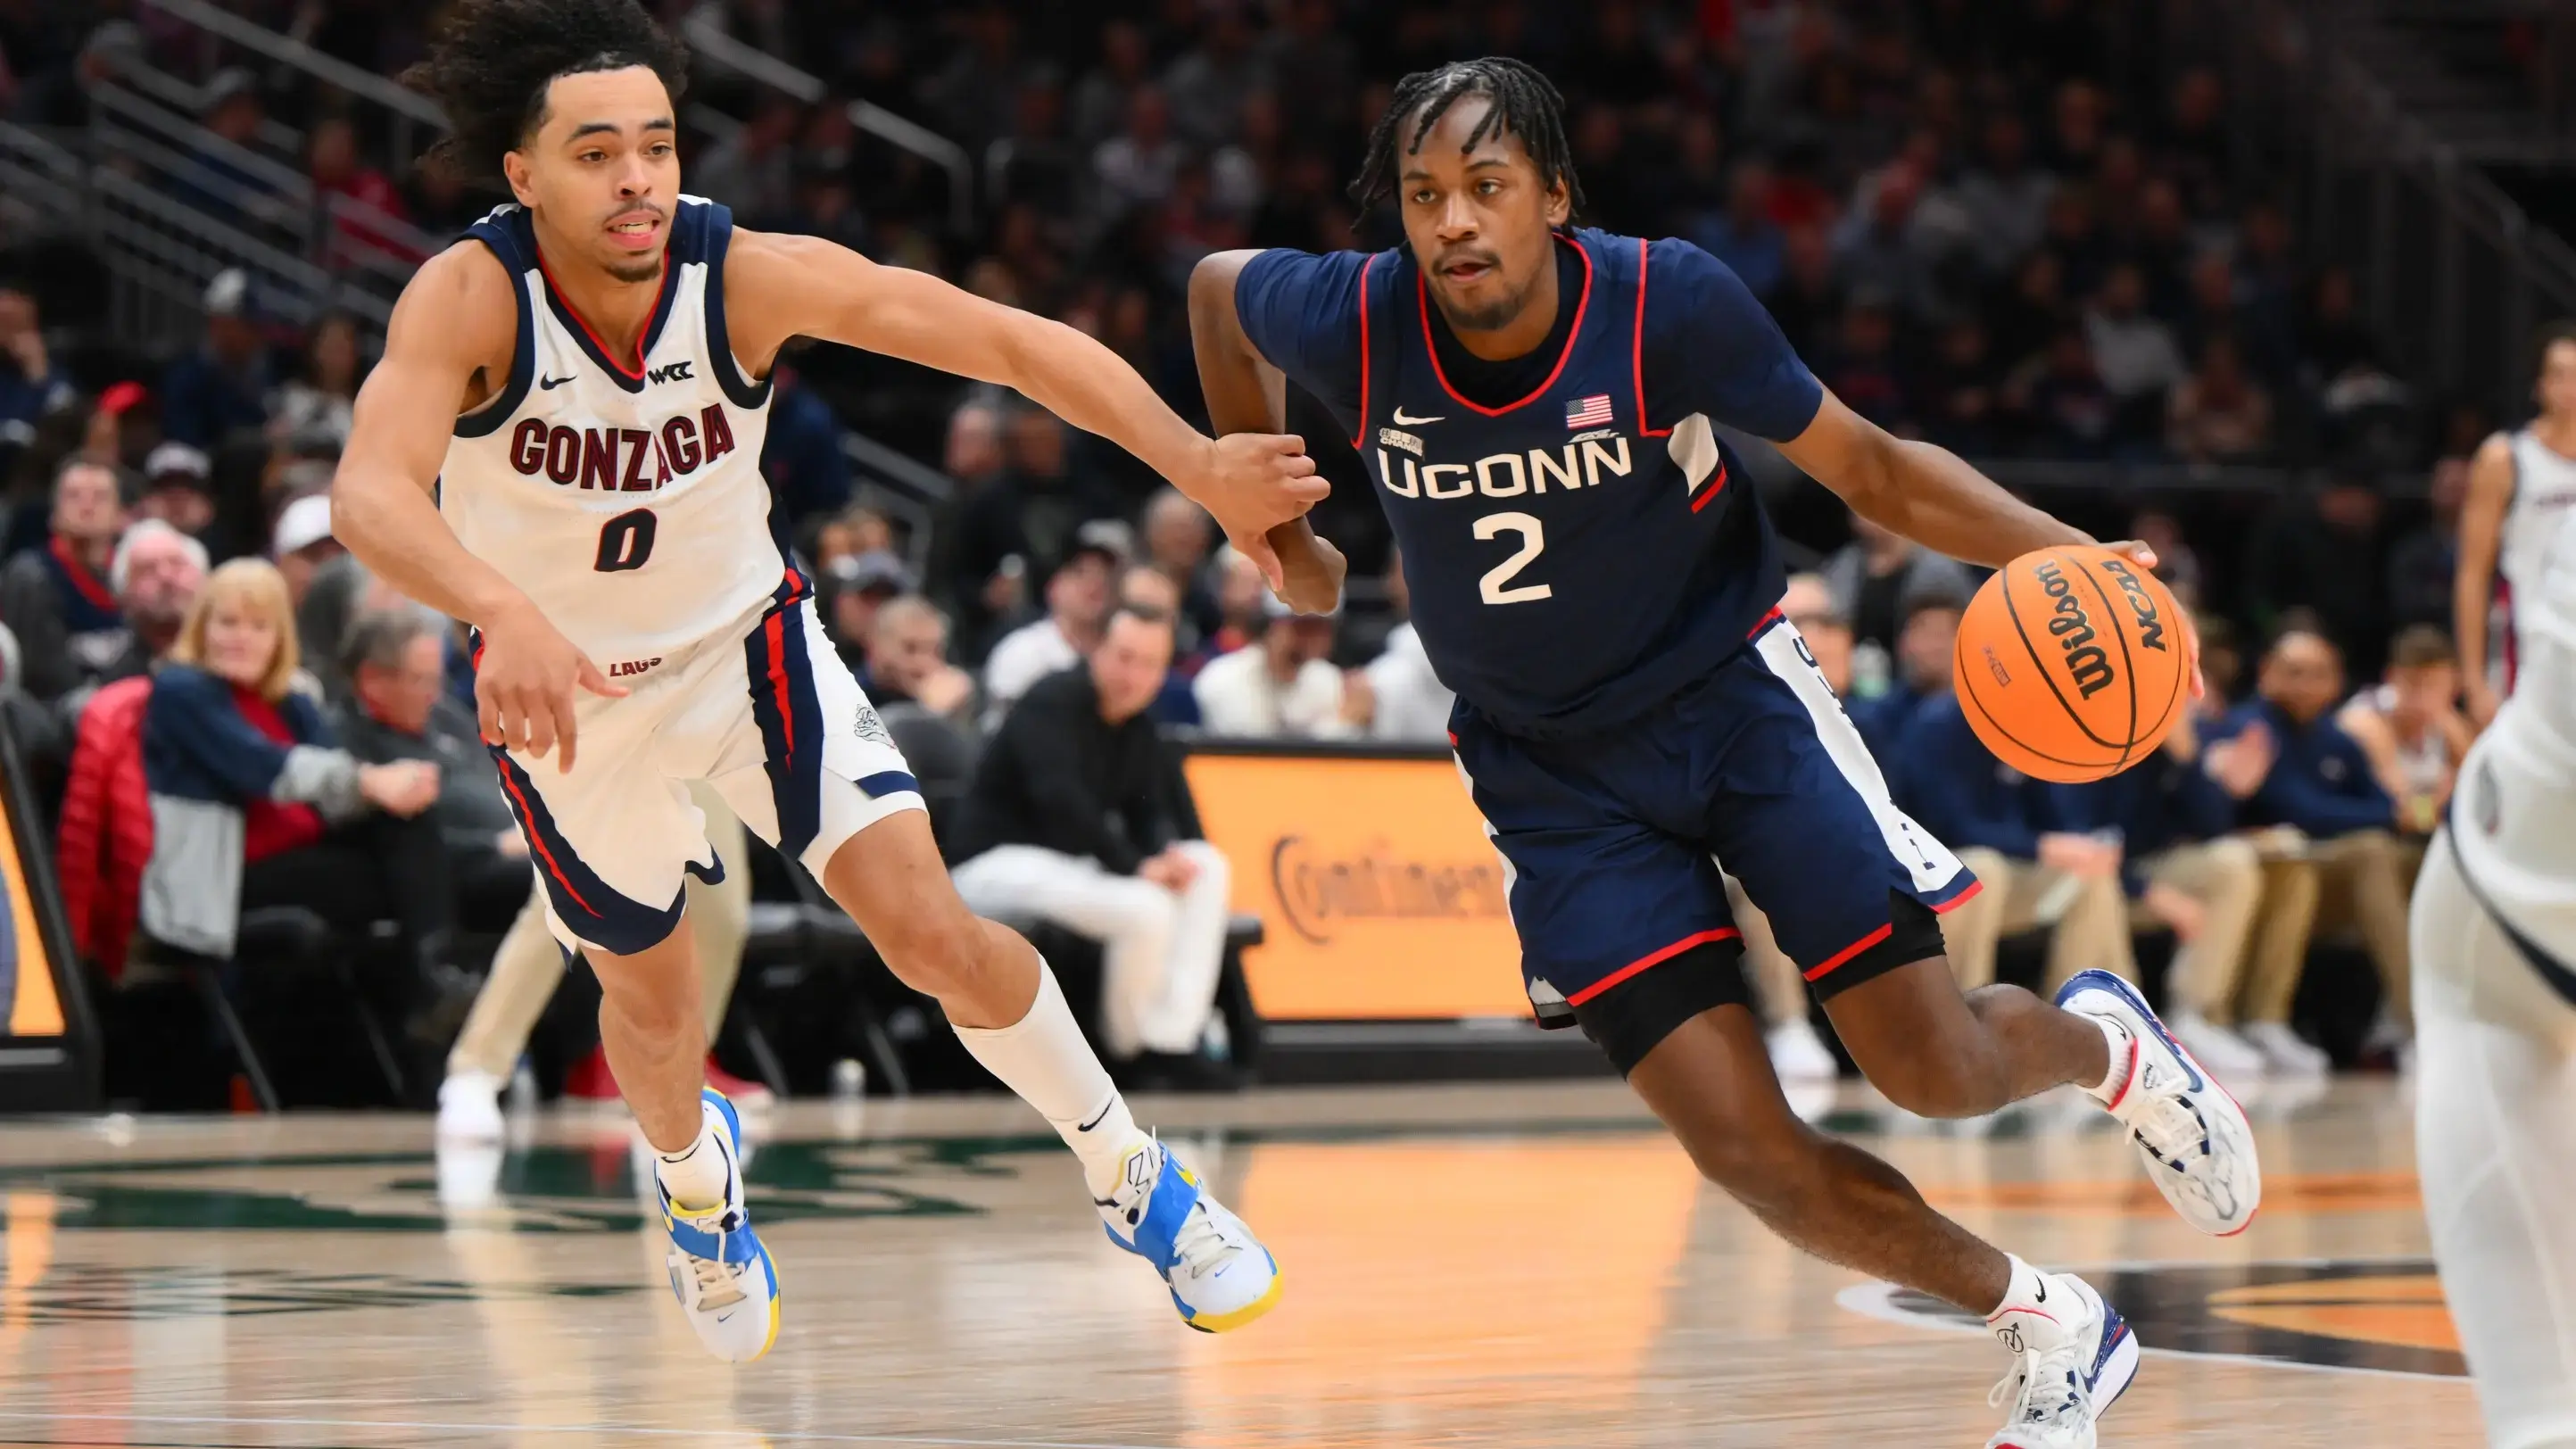 Dec 15, 2023; Seattle, Washington, USA; Connecticut Huskies guard Tristen Newton (2) dribbles the ball while guarded by Gonzaga Bulldogs guard Ryan Nembhard (0) during the second half at Climate Pledge Arena. / Steven Bisig-USA TODAY Sports